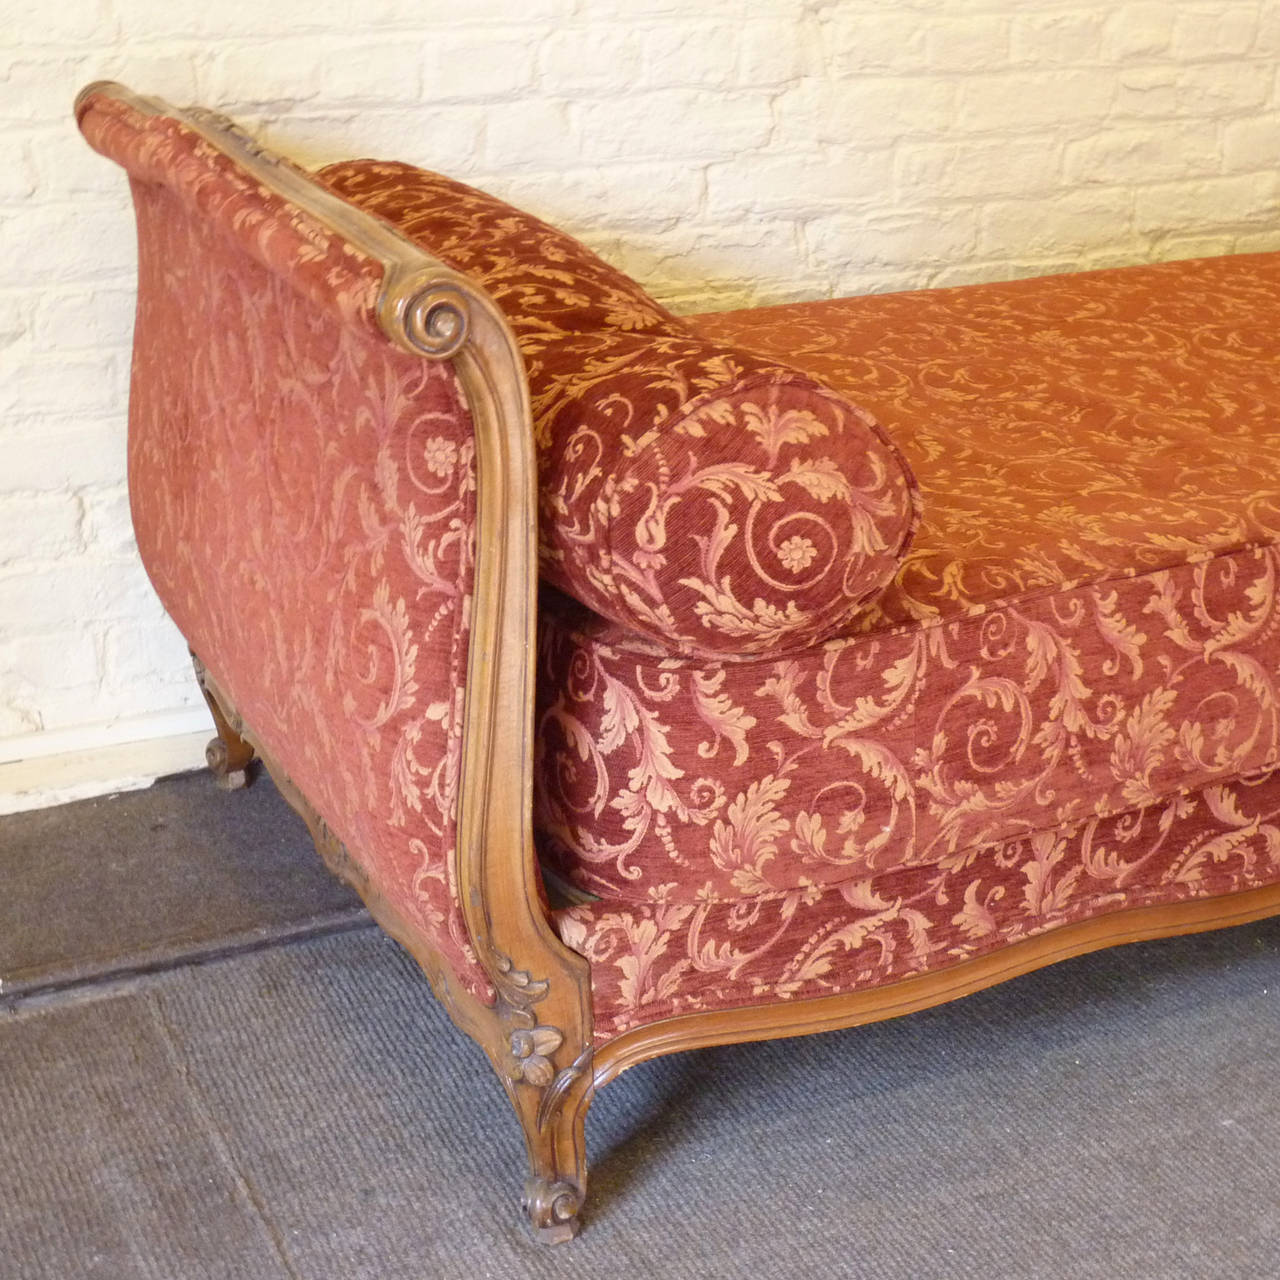 A French Louis XV style roll-ended day bed upholstered in a raspberry scroll chenille fabric.

The base, mattress and two tubular cushions are included in the price.

The dimensions of the bed are:
Absolute Width: 39 in (99 cm)
Absolute